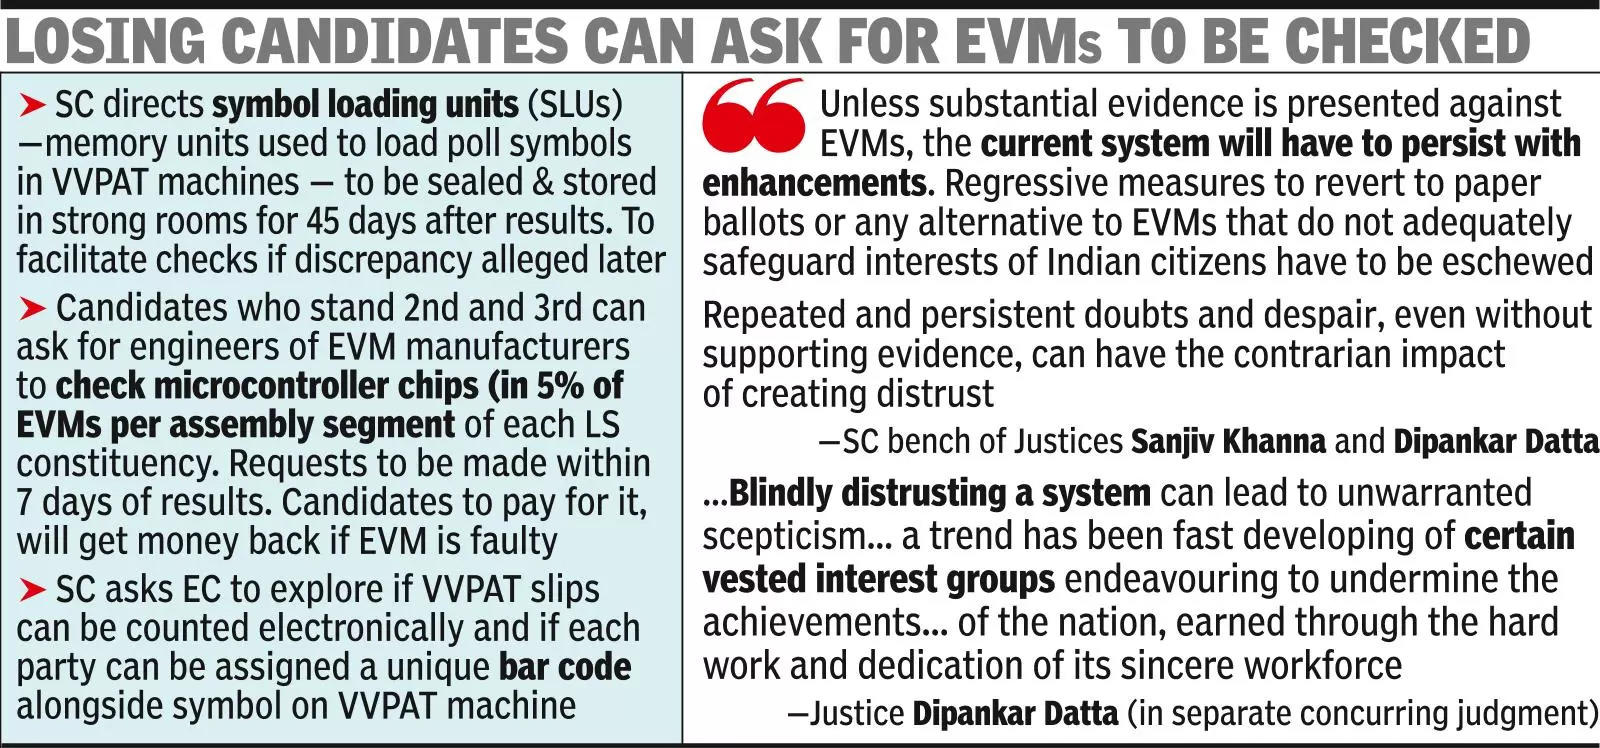 sc rejects return to ballots, says distrust of evms ‘blind’